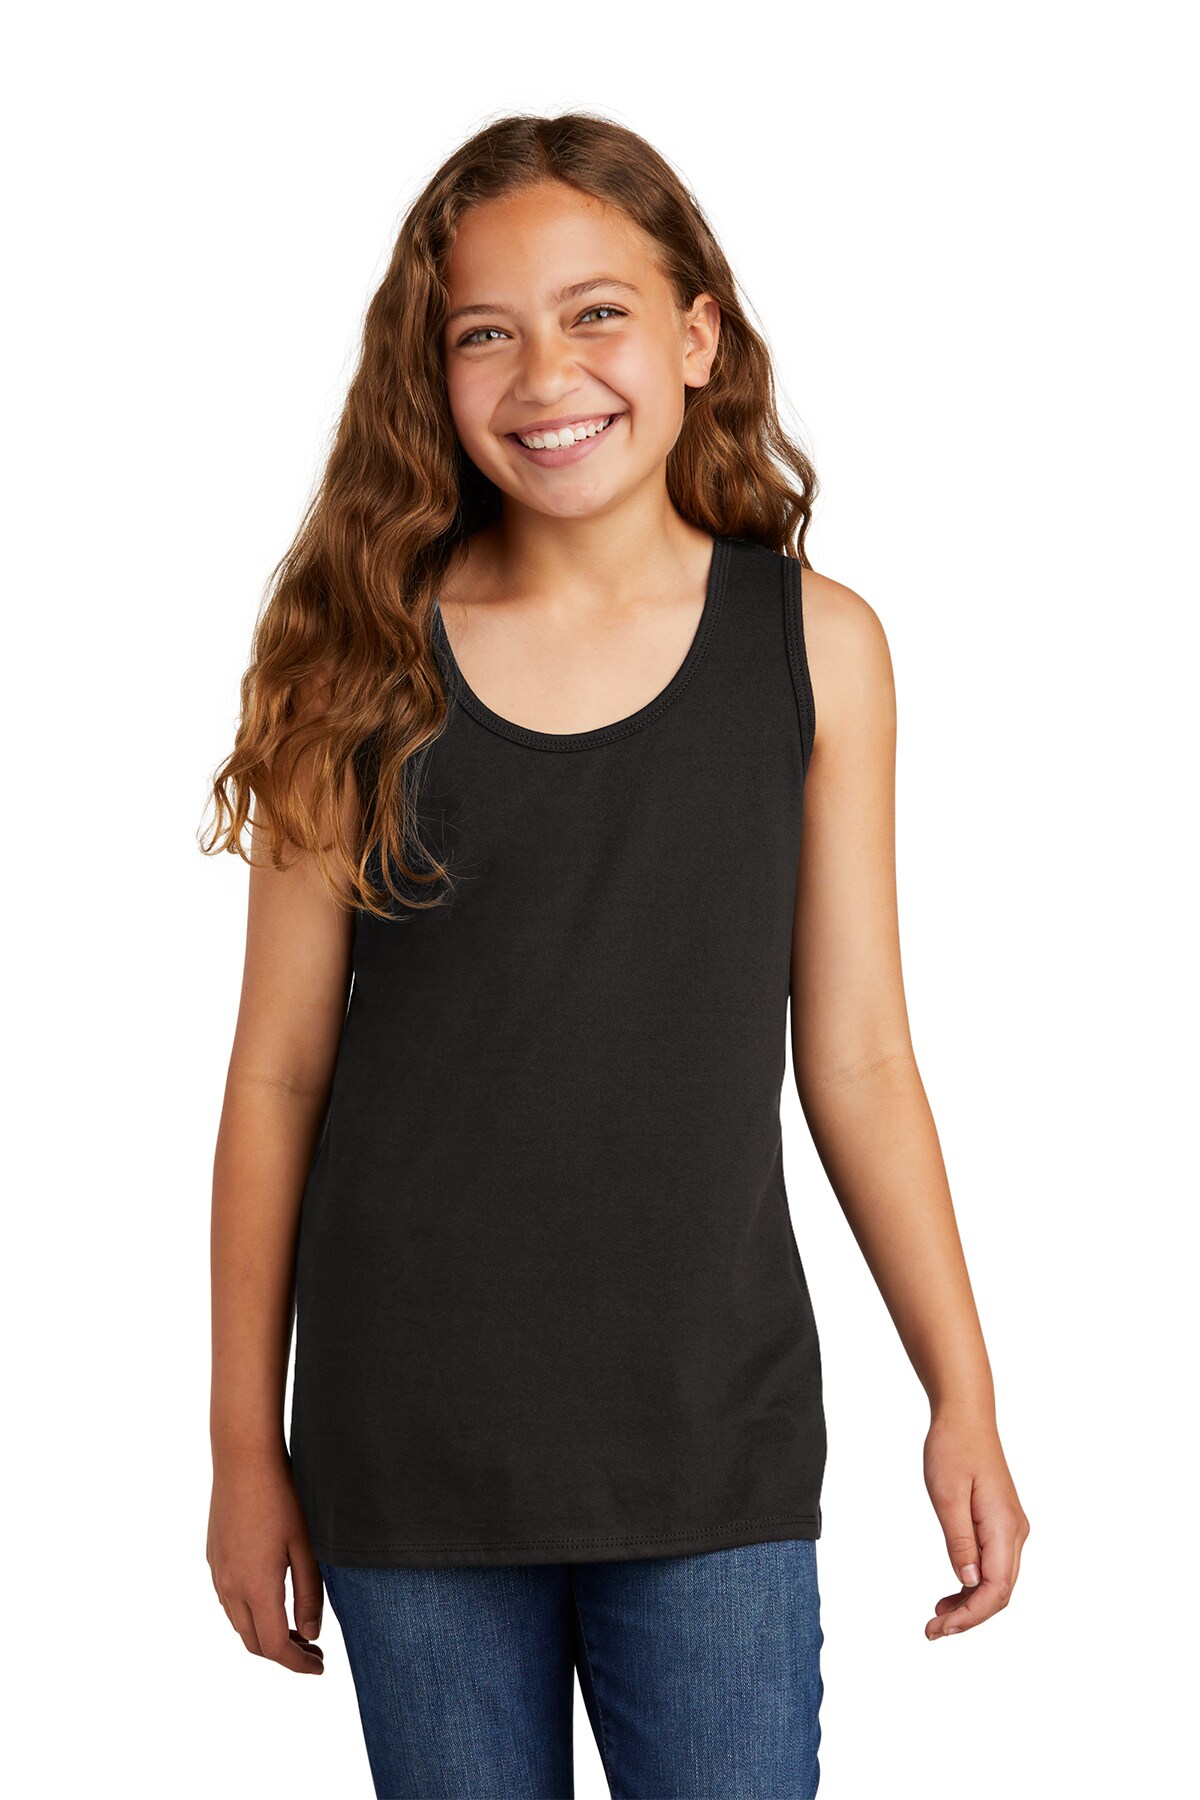 Trendy Youth Tank Top &#x2013; Comfort Meets Fashion for the Next Generation | 4.3-ounce, 100% combed ring-spun cotton Tap | Elevate Your Look with Our Youthful and Stylish Tank Range | RADYAN&#xAE;